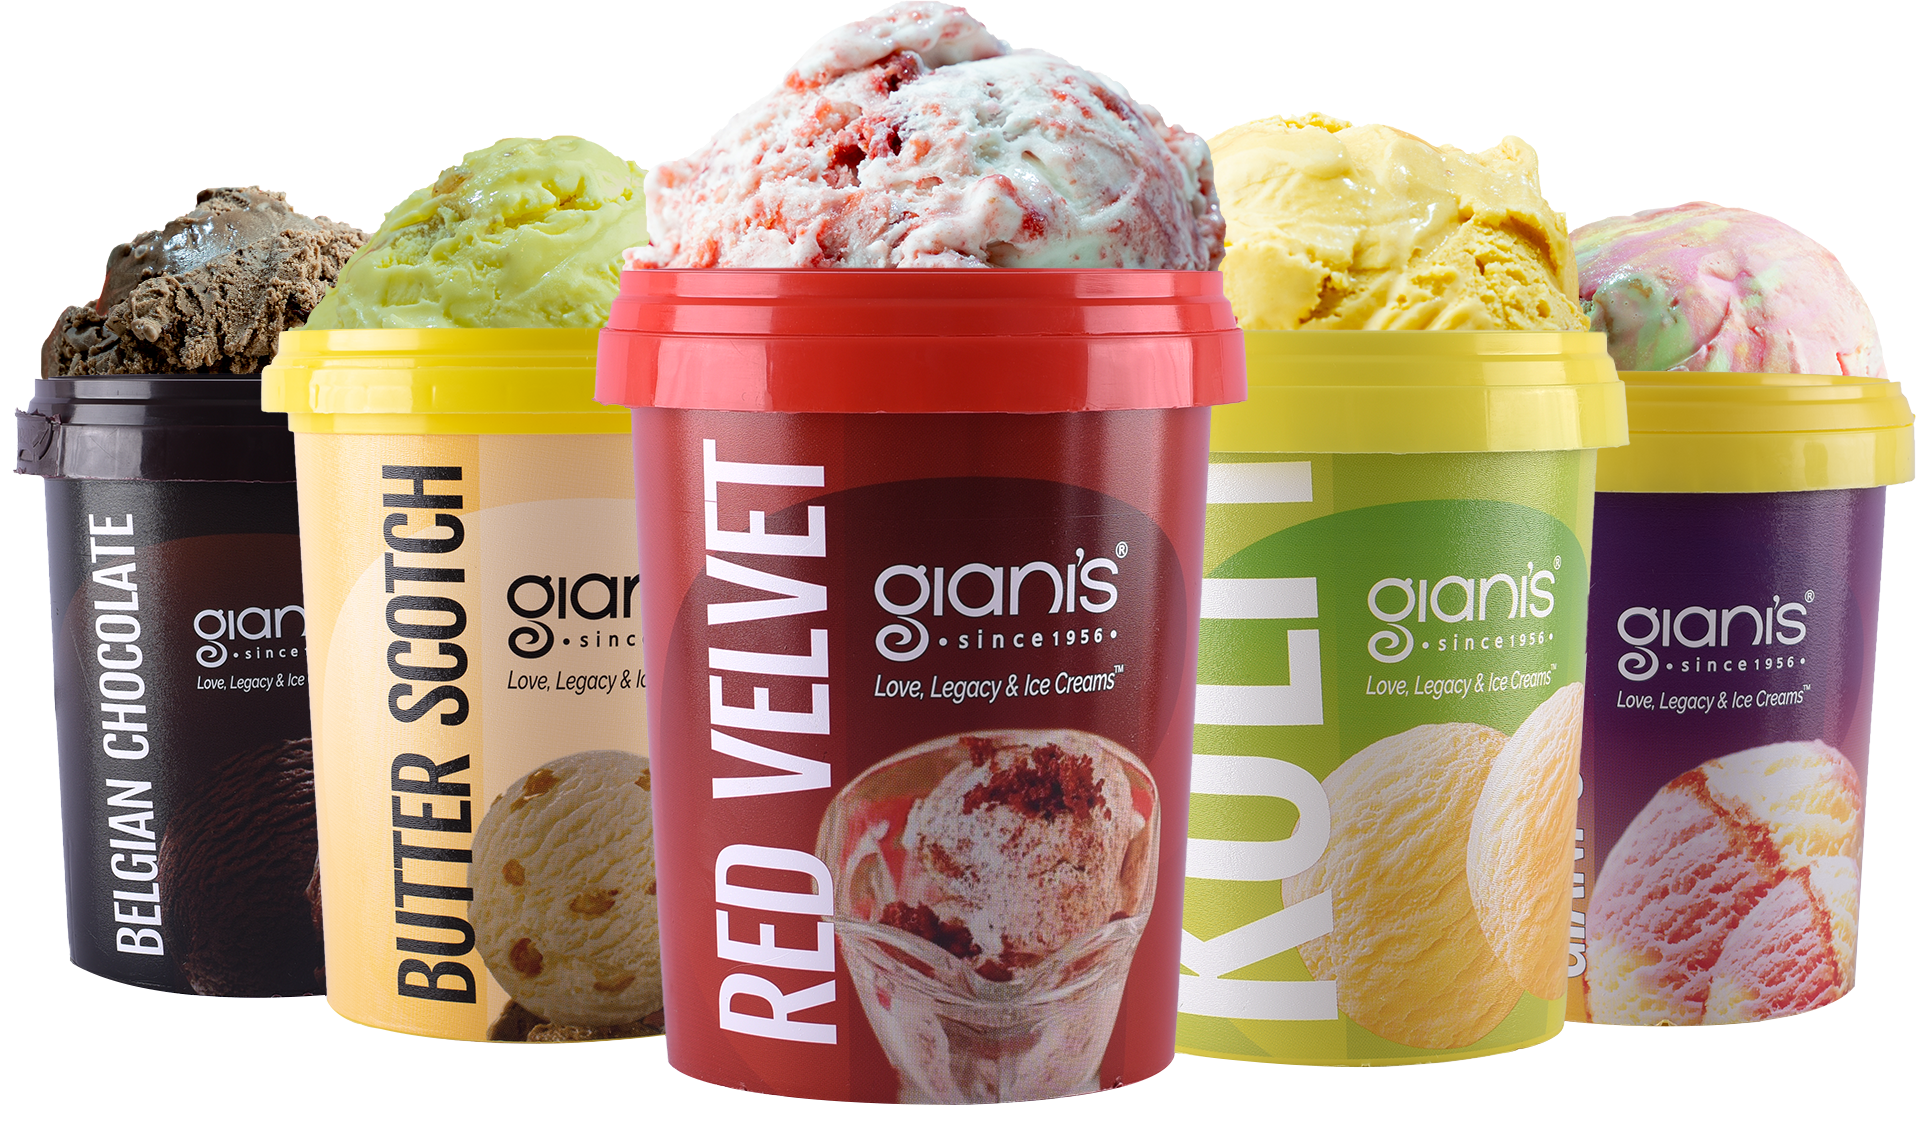  Enjoying Summer with Family Pack Ice Cream Flavours by Giani’s